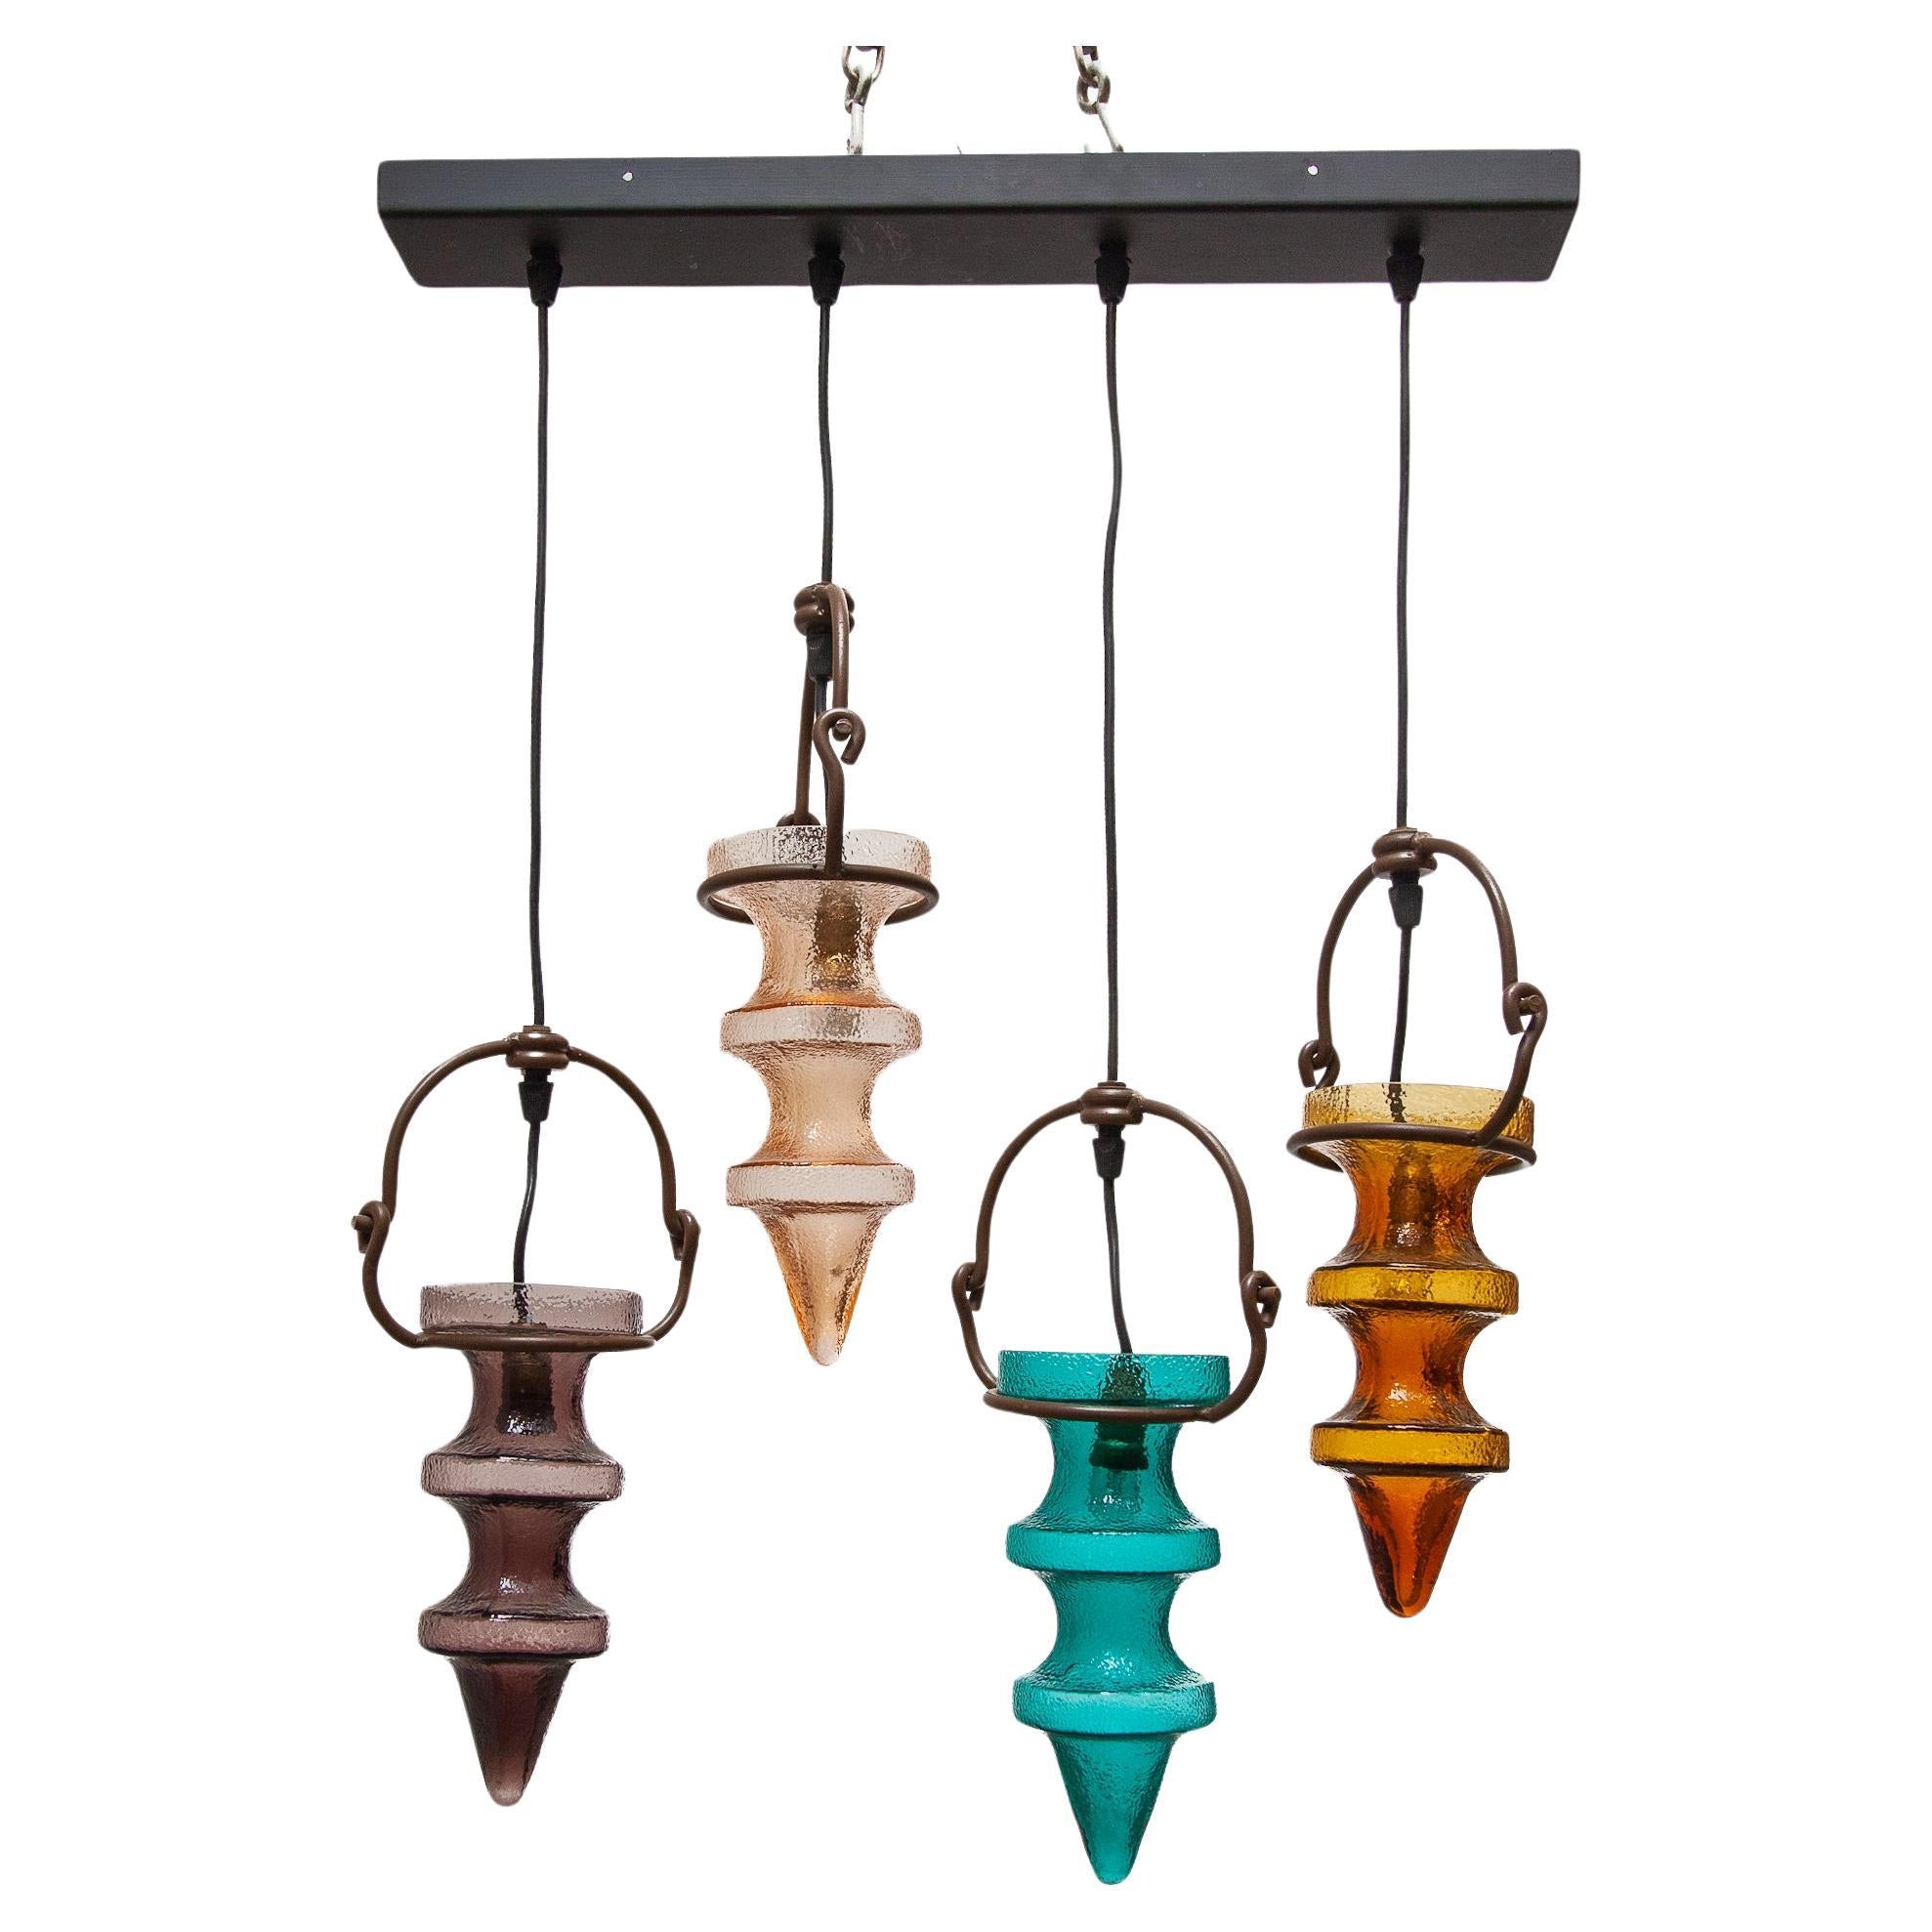 Cascade ‘Stalactites’ Colored Glass Chandelier designed by Nanny Still for Raak